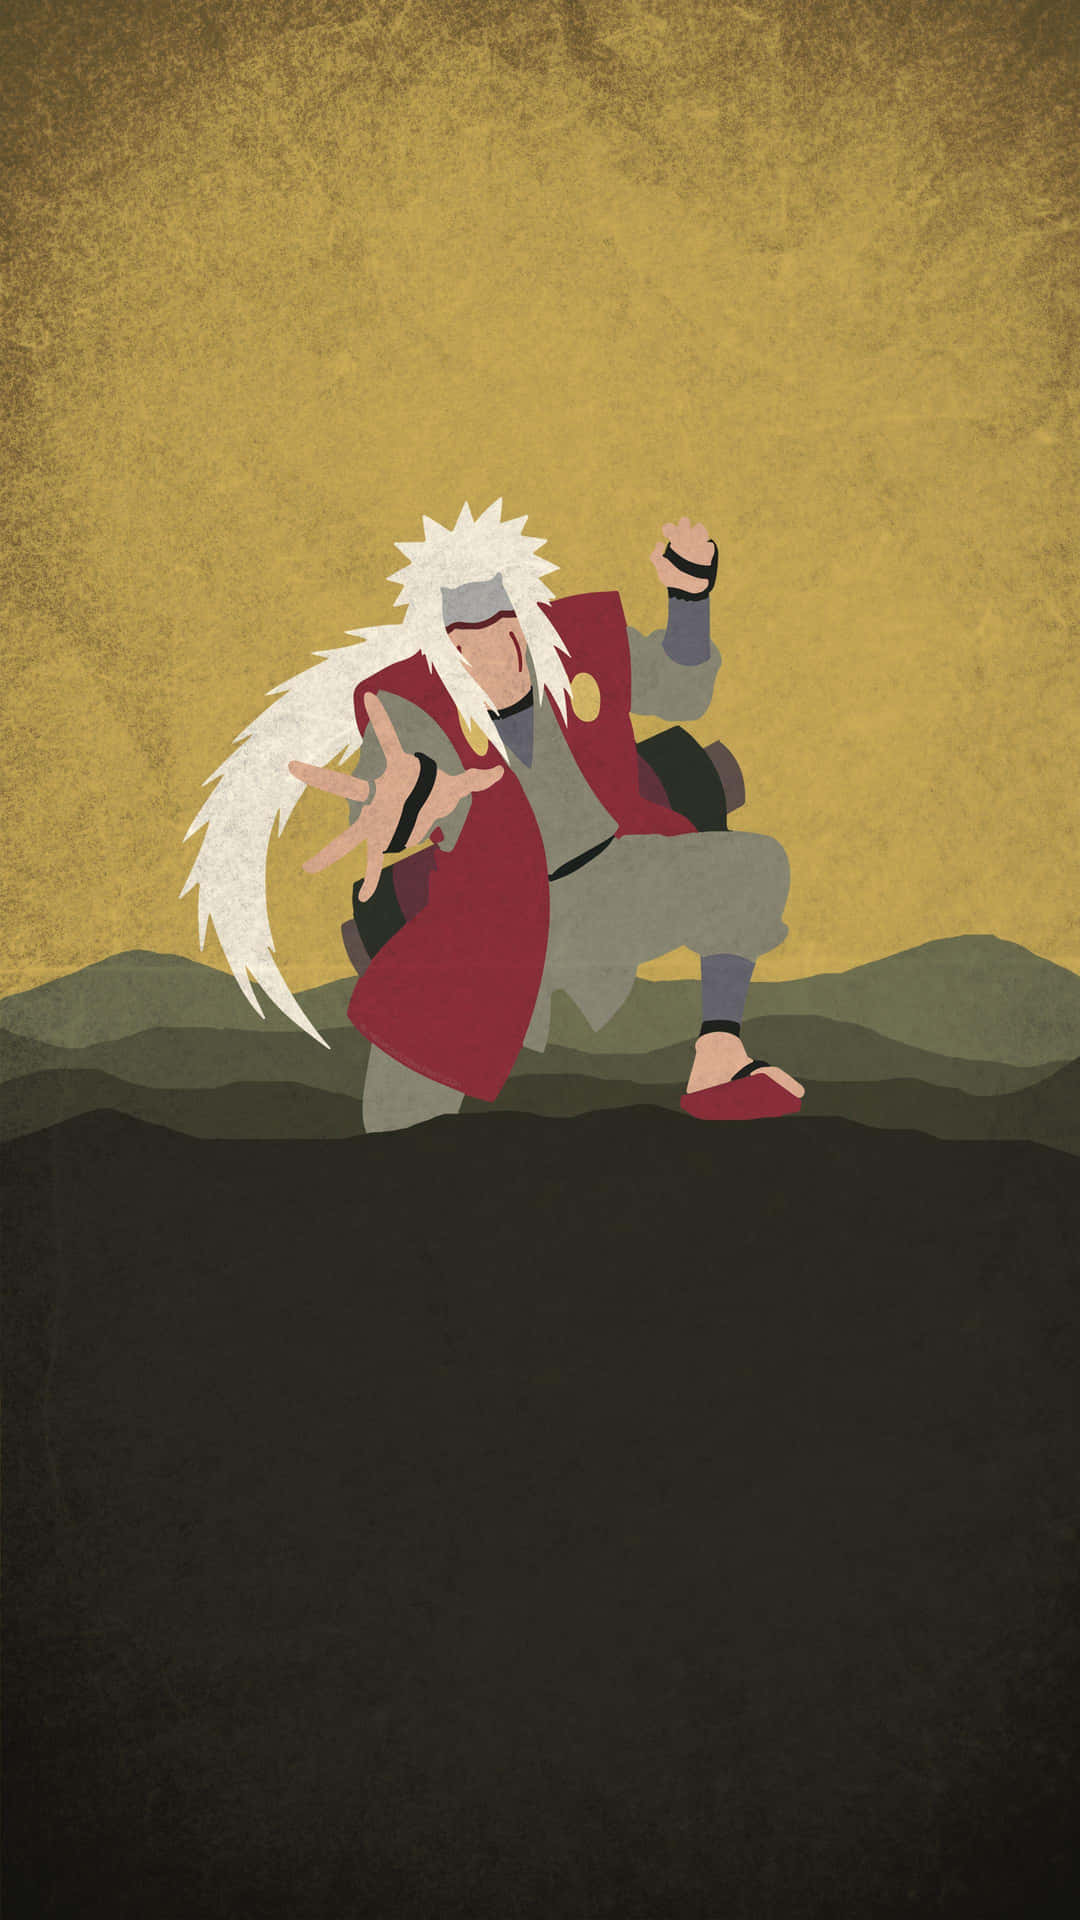 Experience the thrill of Naruto's adventures on your phone screen with this electrifying phone background!